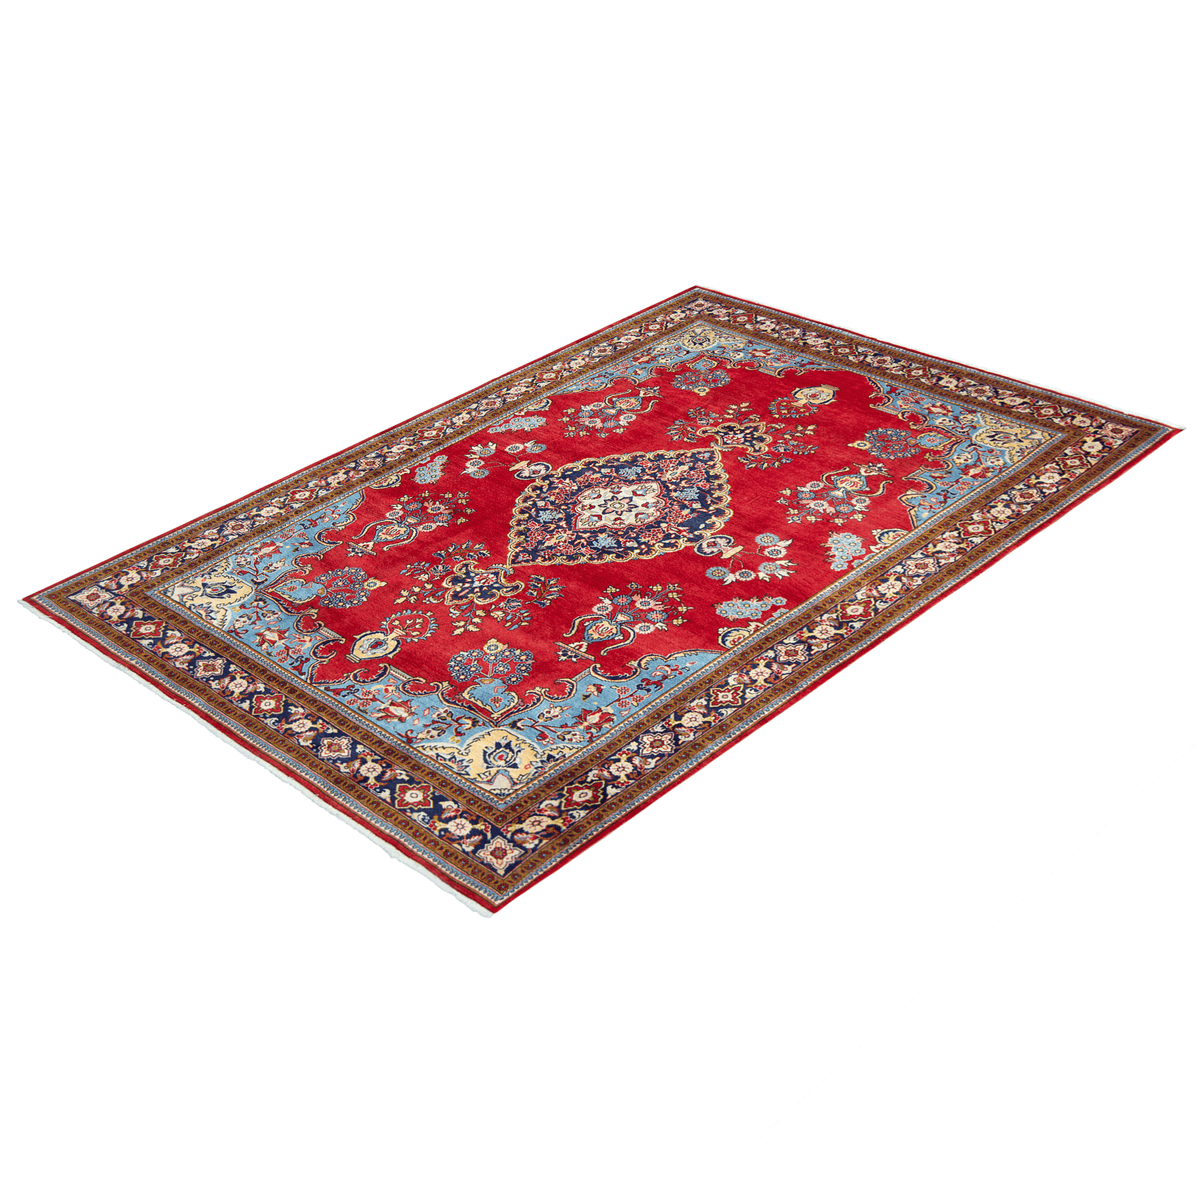 Hand-knotted Wool Saruk Persian Rug 220cm x 337cm